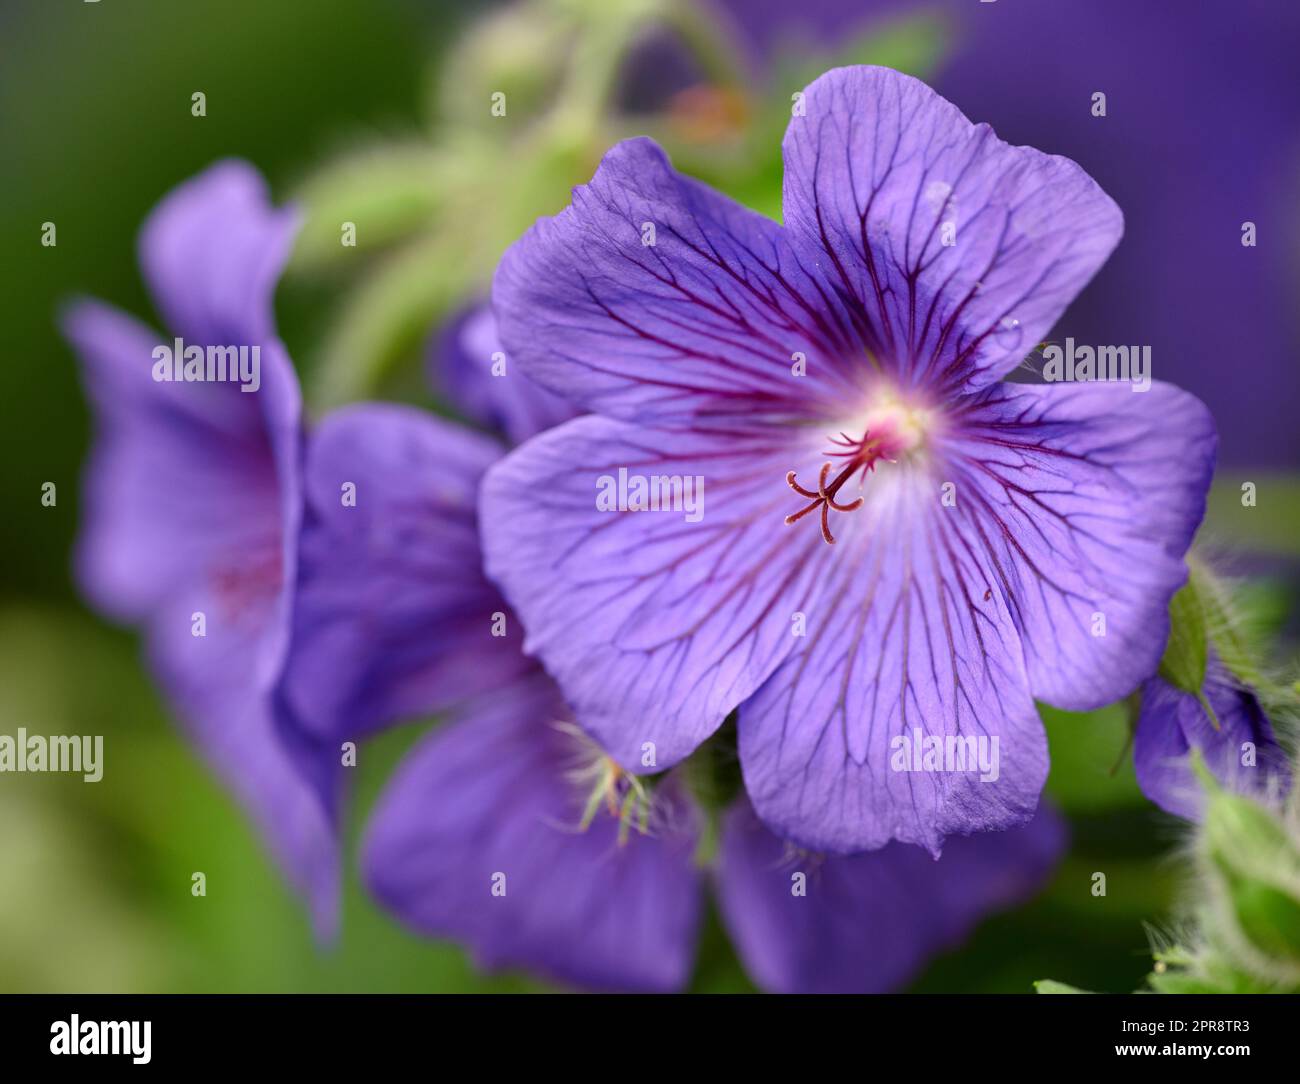 Closeup of a purple Cranesbill flower growing in a garden. Beautiful details of a colorful geranium flowering plant with pretty patterns on petals. Gardening blossoms for outdoor decoration in spring Stock Photo